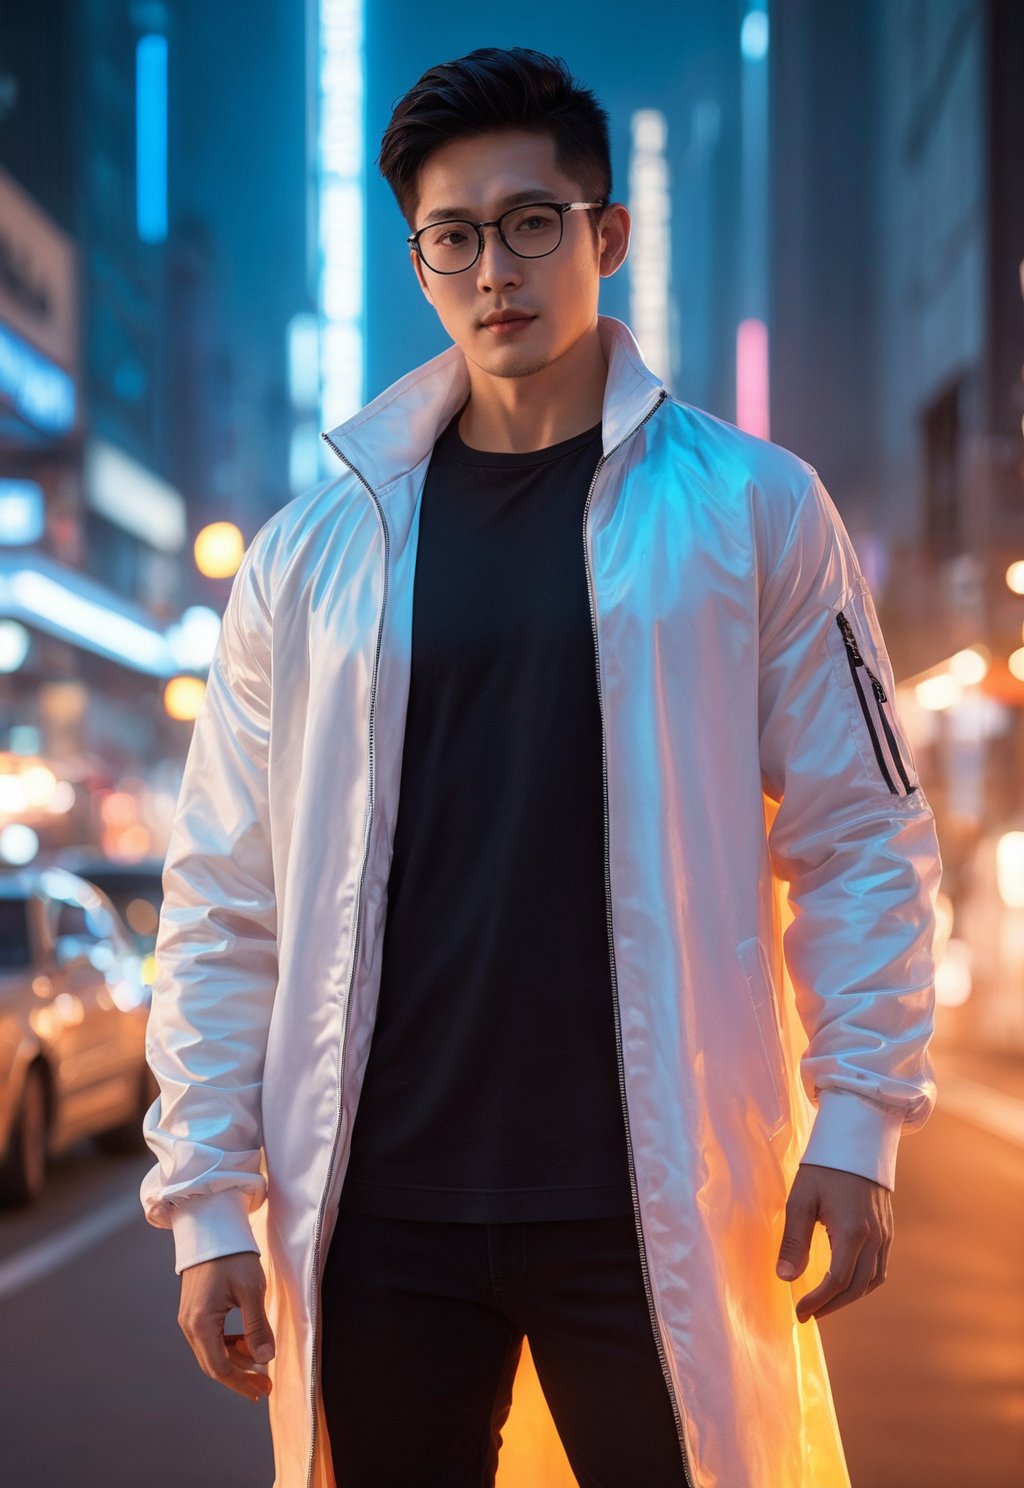 A strong and athletic Asian man wearing a white jacket and a shirt,stubble,glasses, (upper body:1.2), (simple black background:1.2), (computer matrix), (digital dissolve:1.4), (cyborg), pale skin, (short hair), ((black hair)), (blue hair), (hair gradient:1.5), (glowing eyes:1.2), orange eyes, (looking at viewer), light smile, hand on own face, (black sweater, long sleeves:1.4), (masterpiece, best quality),Close mouth,
, smile, (oil shiny skin:1.3), (huge_boobs:2.4), willowy, chiseled, (hunky:2), body turn 46 degree, (perfect anatomy, prefecthand, long fingers, 4 fingers, 1 thumb), 9 head body lenth, dynamic sexy pose, breast apart, ((medium shot )), (artistic pose of a woman),photo r3al,neon style,simple background,NIJI STYLE,DonMChr0m4t3rr4XL ,DonMF41ryW1ng5XL,Strong Backlit Particles, Asian man